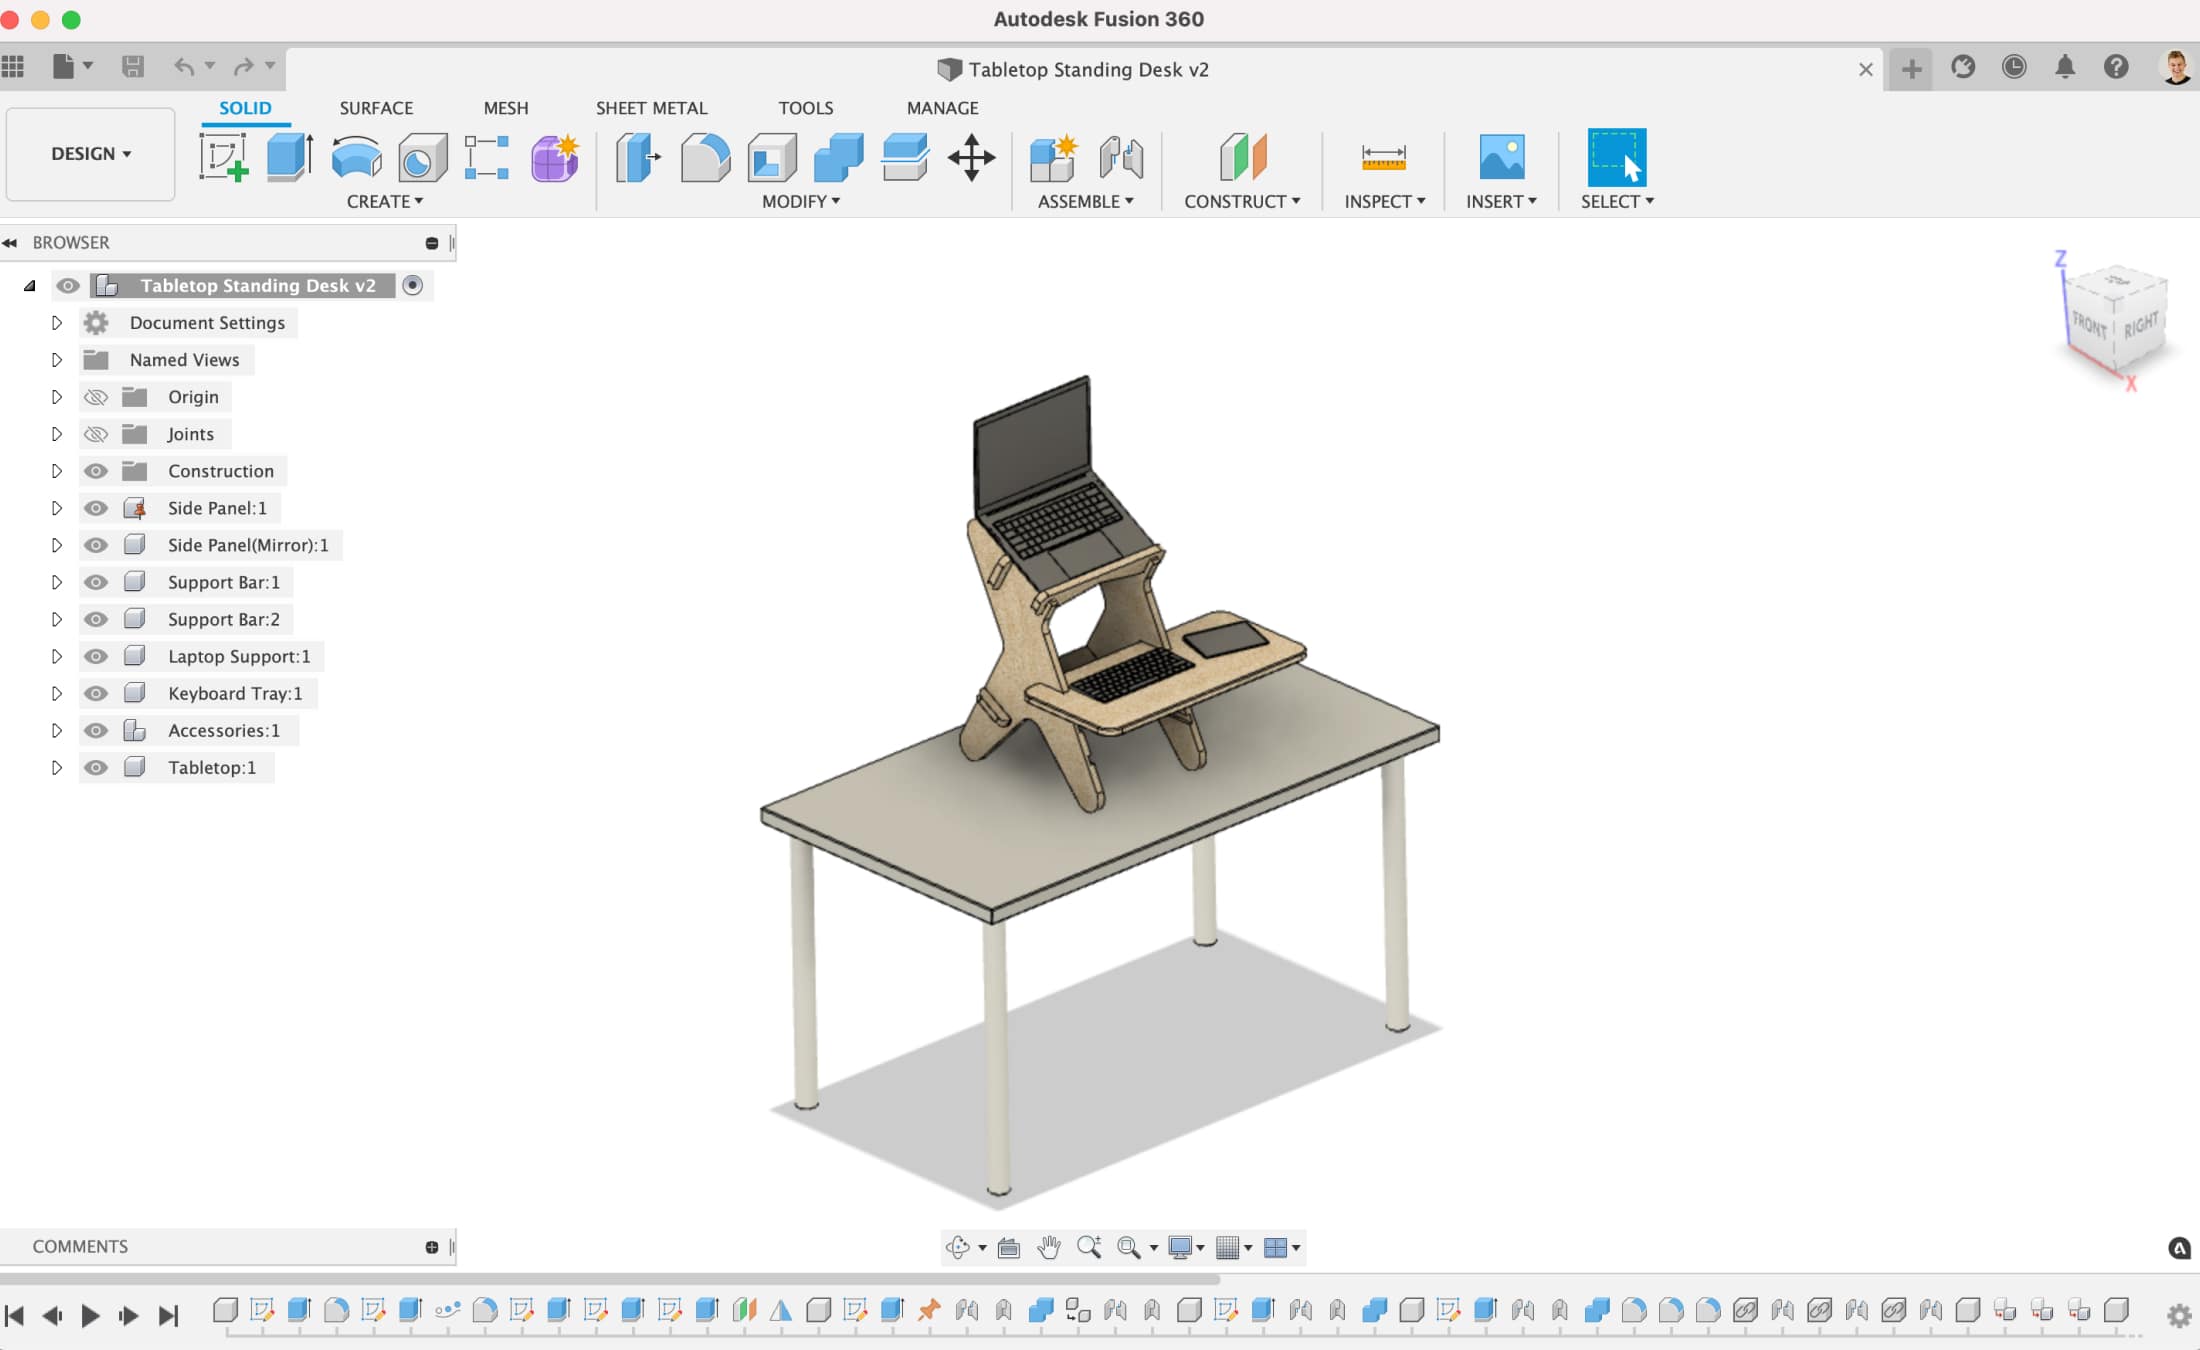 autodesk fusion 360 free for personal use